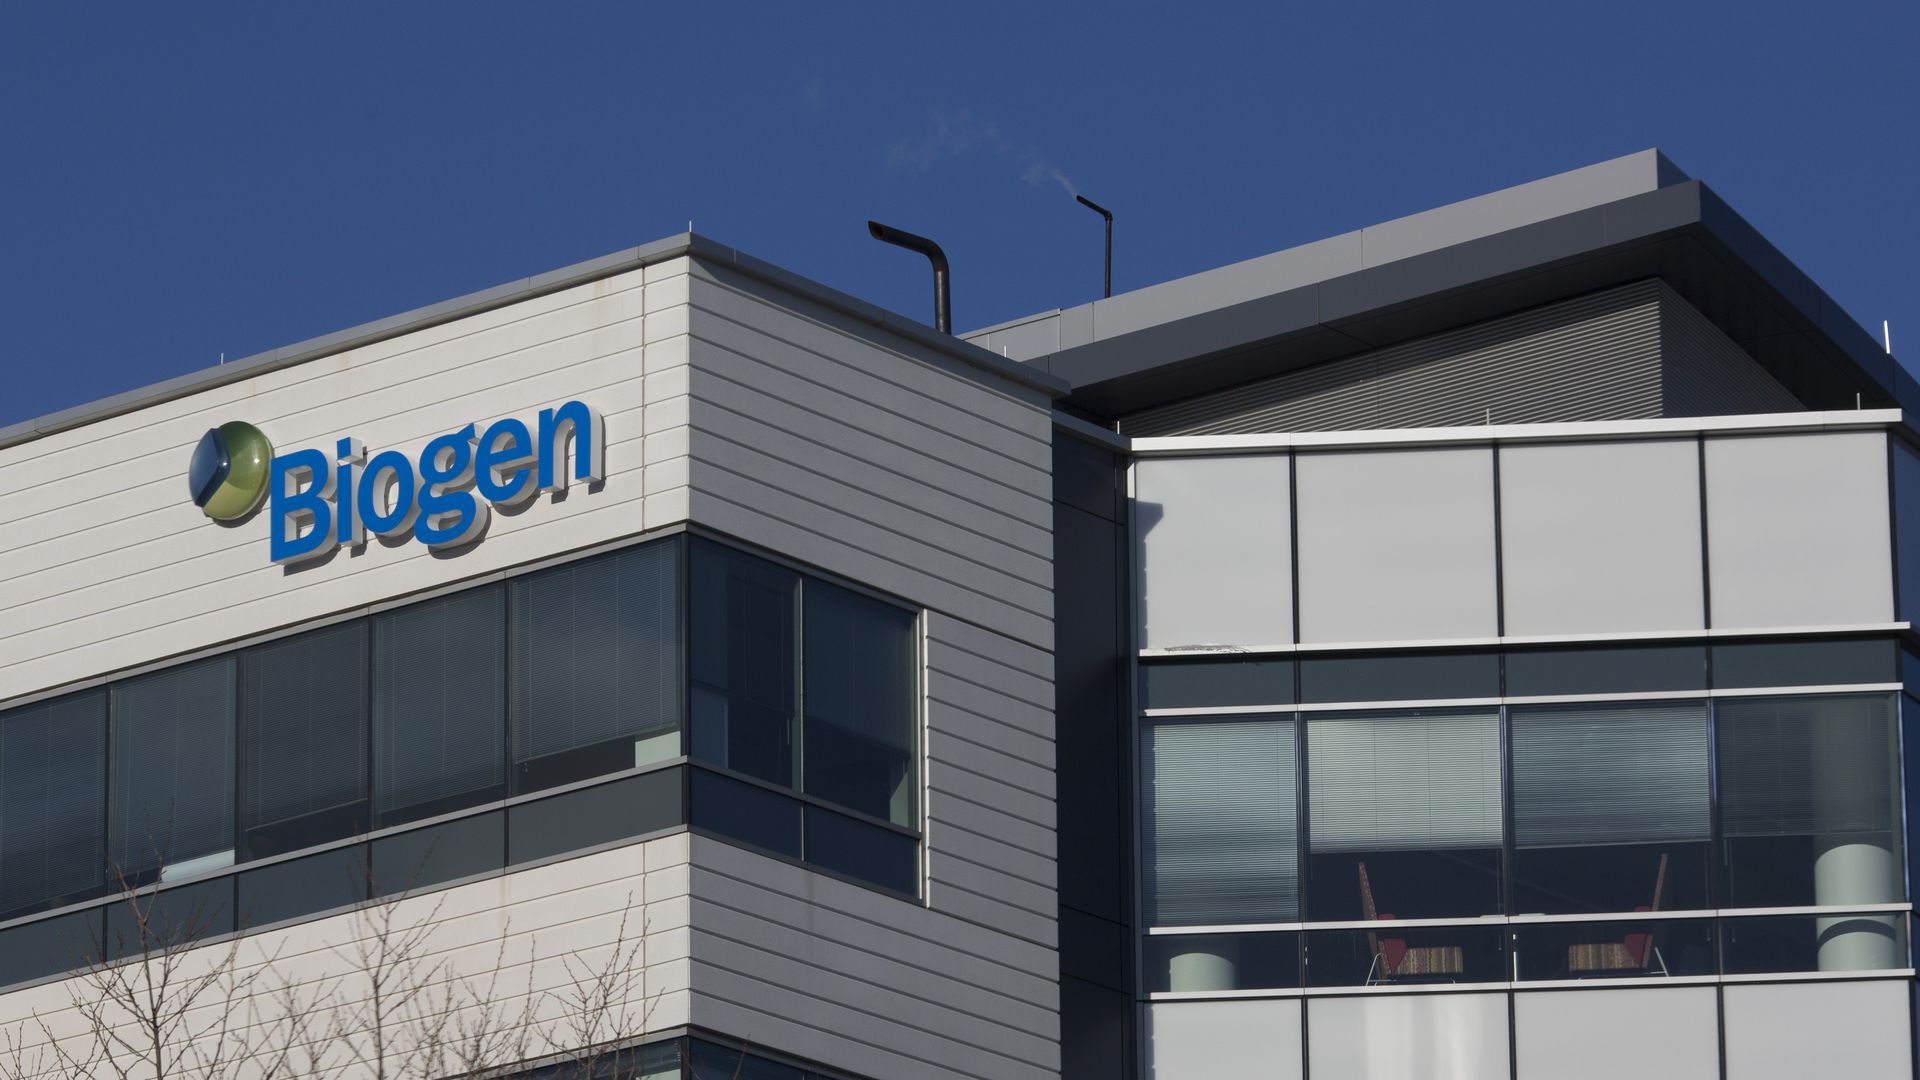 Picture of the Biogen sign on a building in Massachusetts